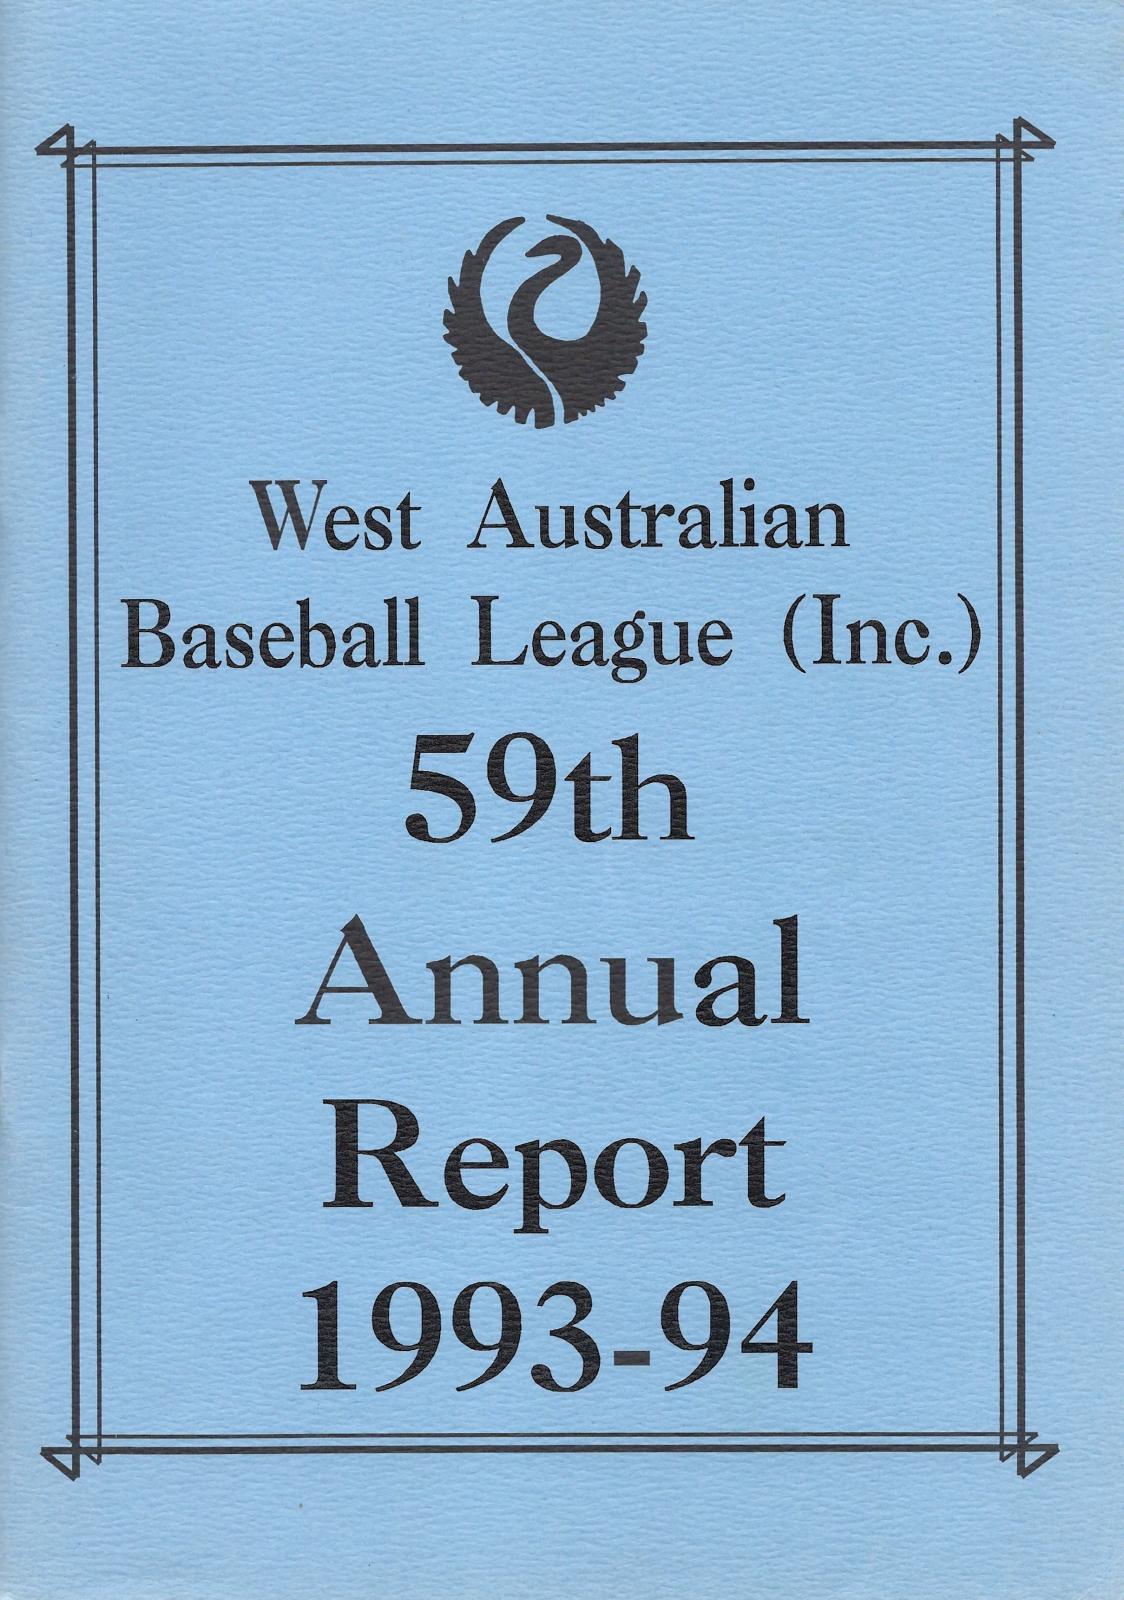 West Australian Baseball League 59th Annual Report 1993-94 cover page